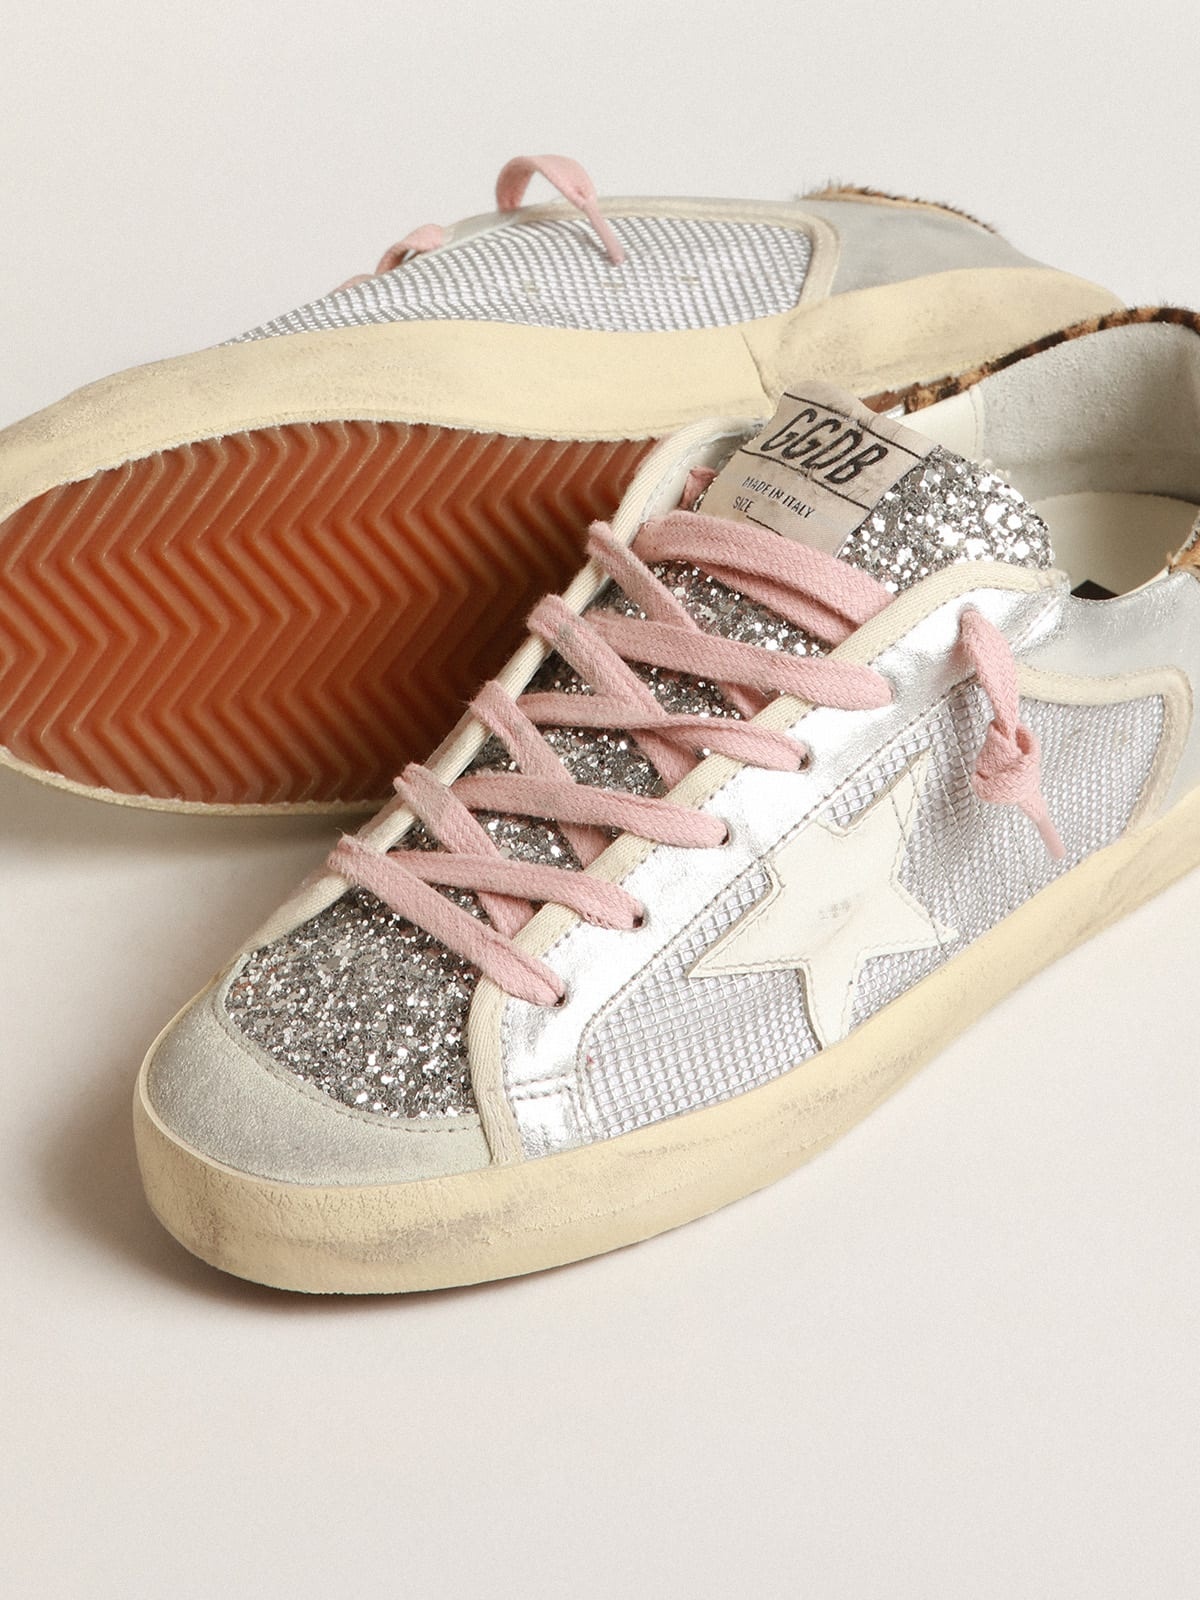 Super-Star LTD in mesh and suede with silver glitter tongue - 3